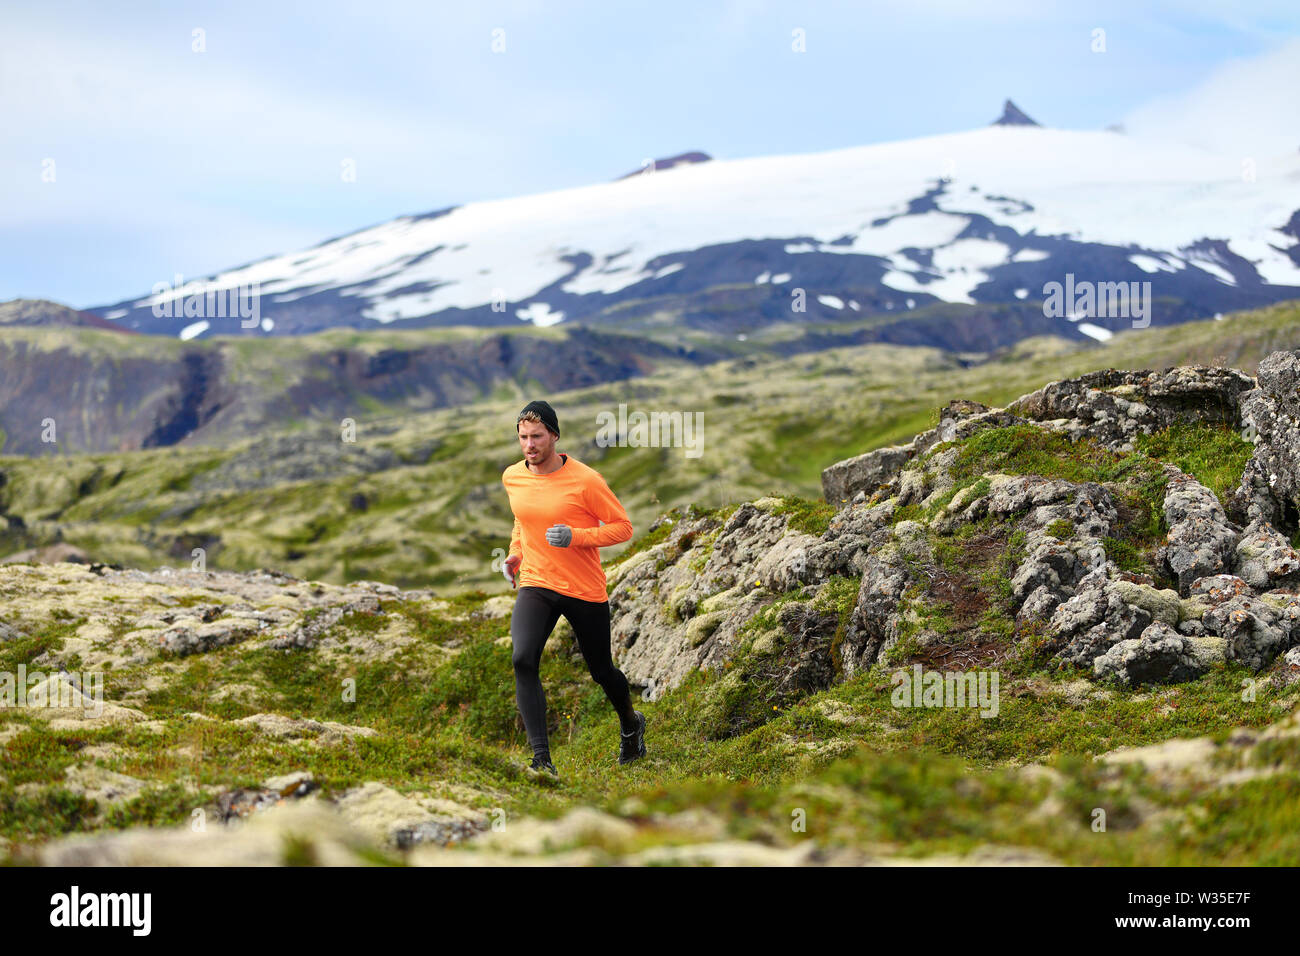 Running man athlete exercising trail runner. Fit male sport fitness model training and jogging outdoors in beautiful mountain nature landscape by Snaefellsjokull, Snaefellsnes, Iceland. Stock Photo